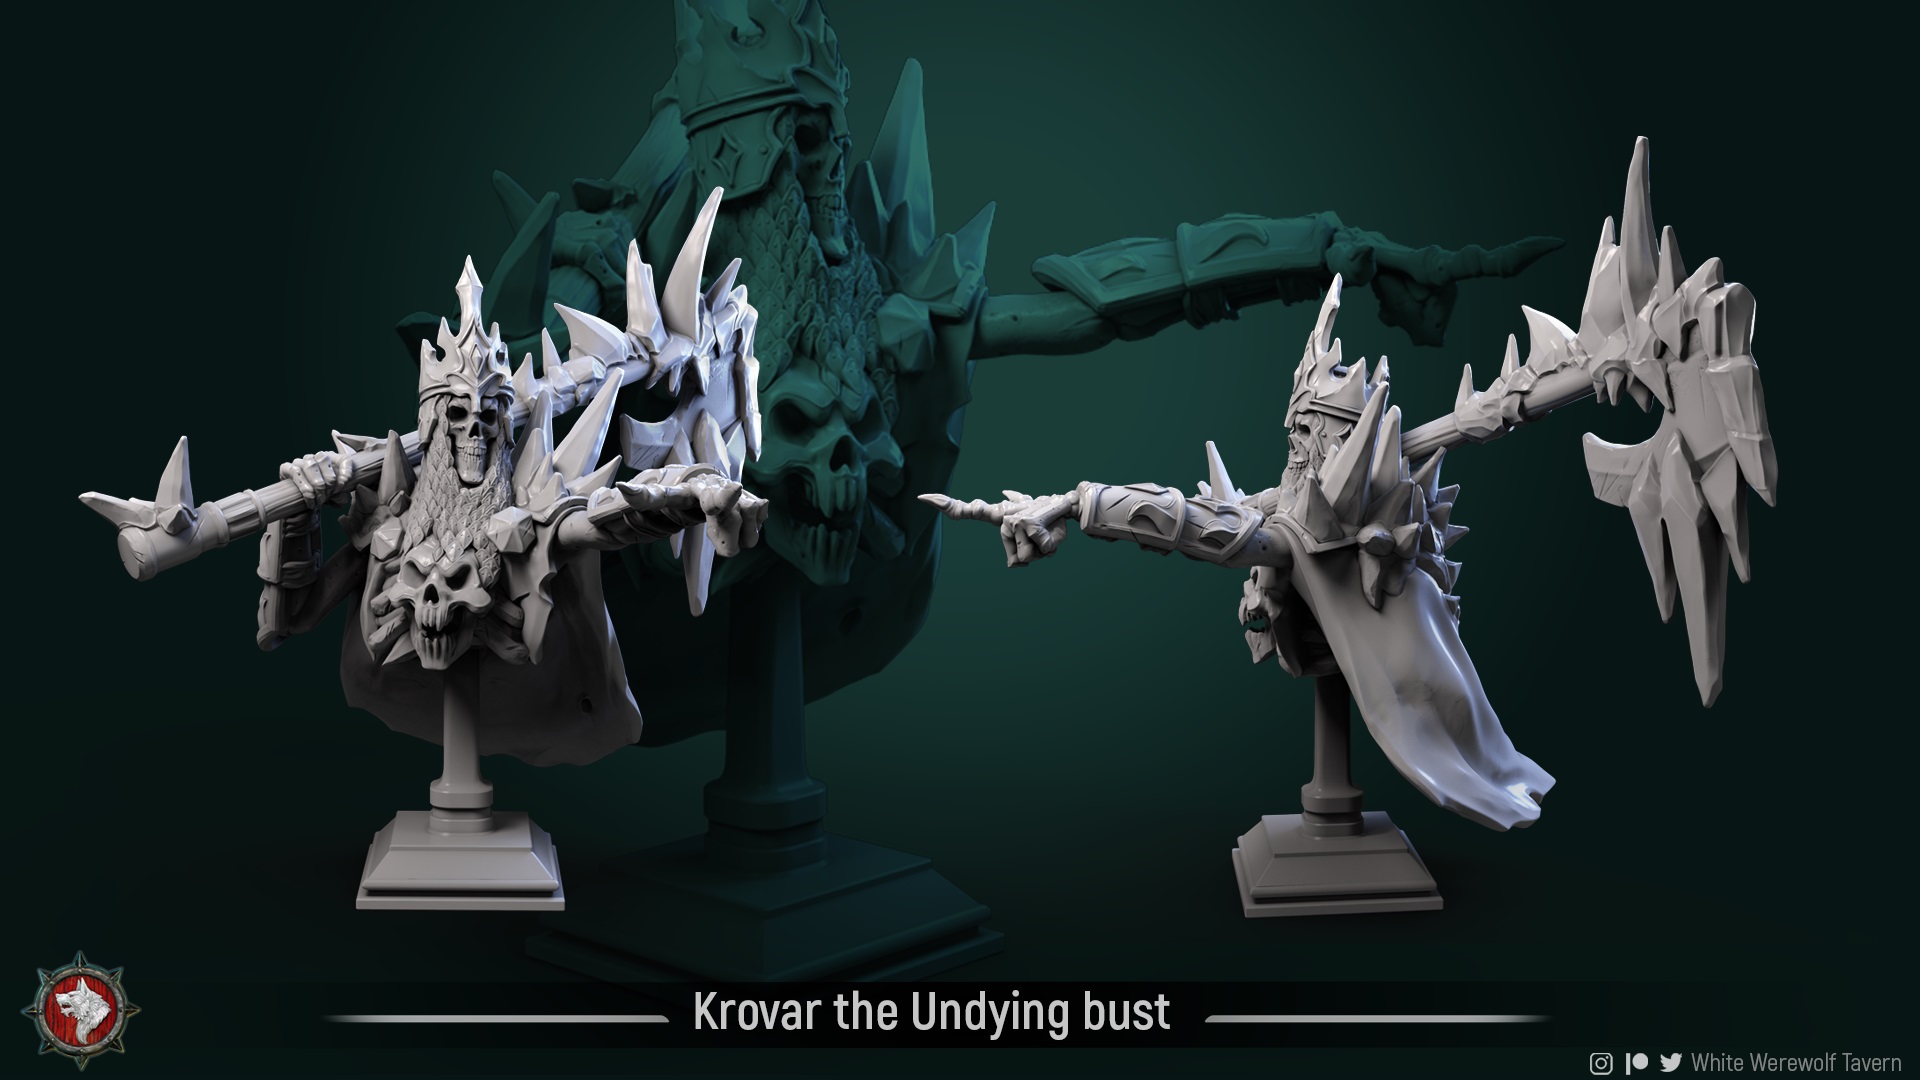 Krovar the undying bust